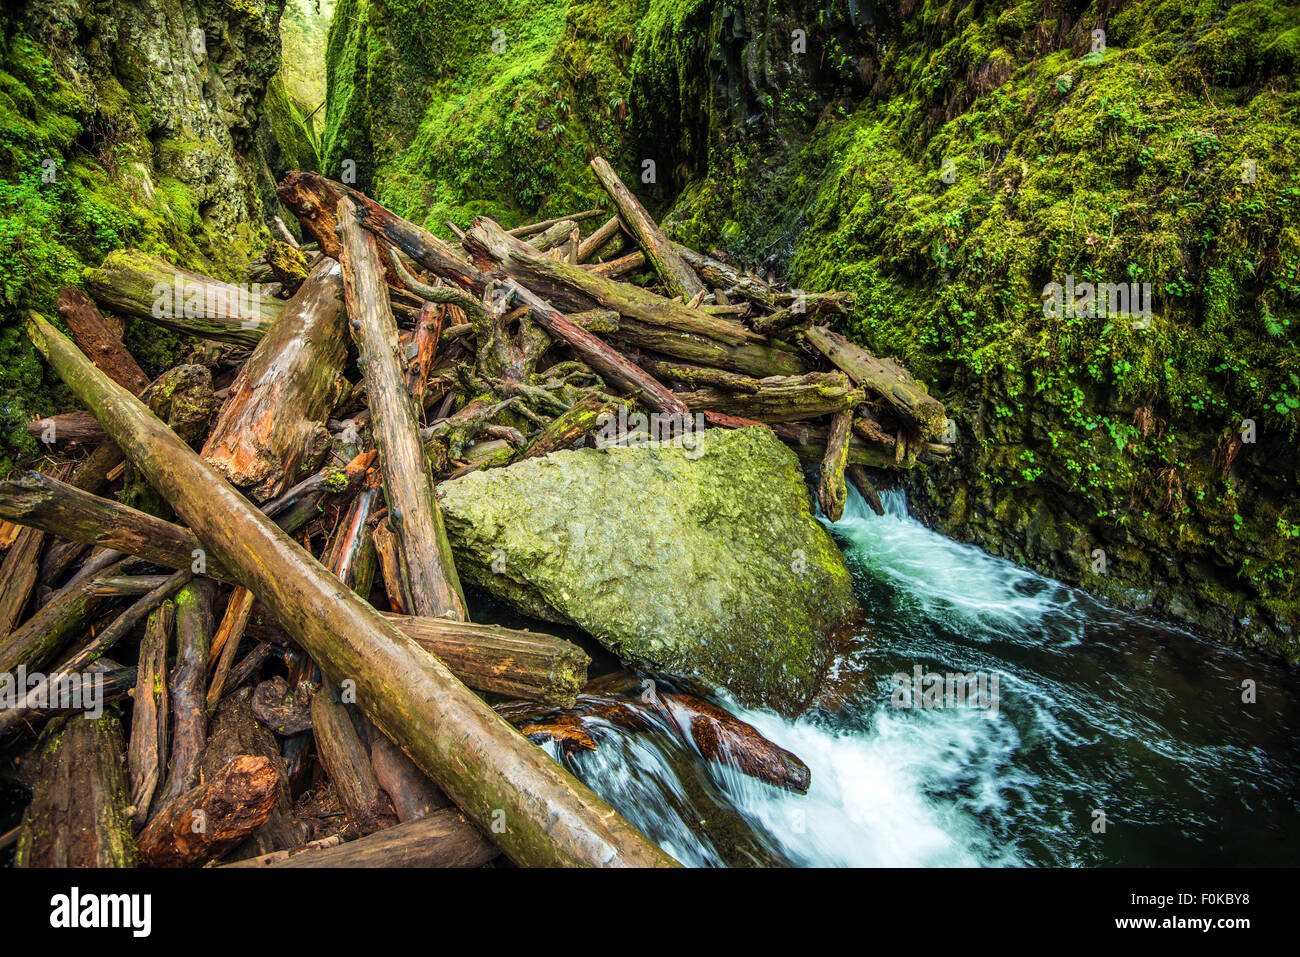 Natural Logs Dam on the Small Canyon River in Oregon Columbia Gorge Area. Oregon, United States. Stock Photo